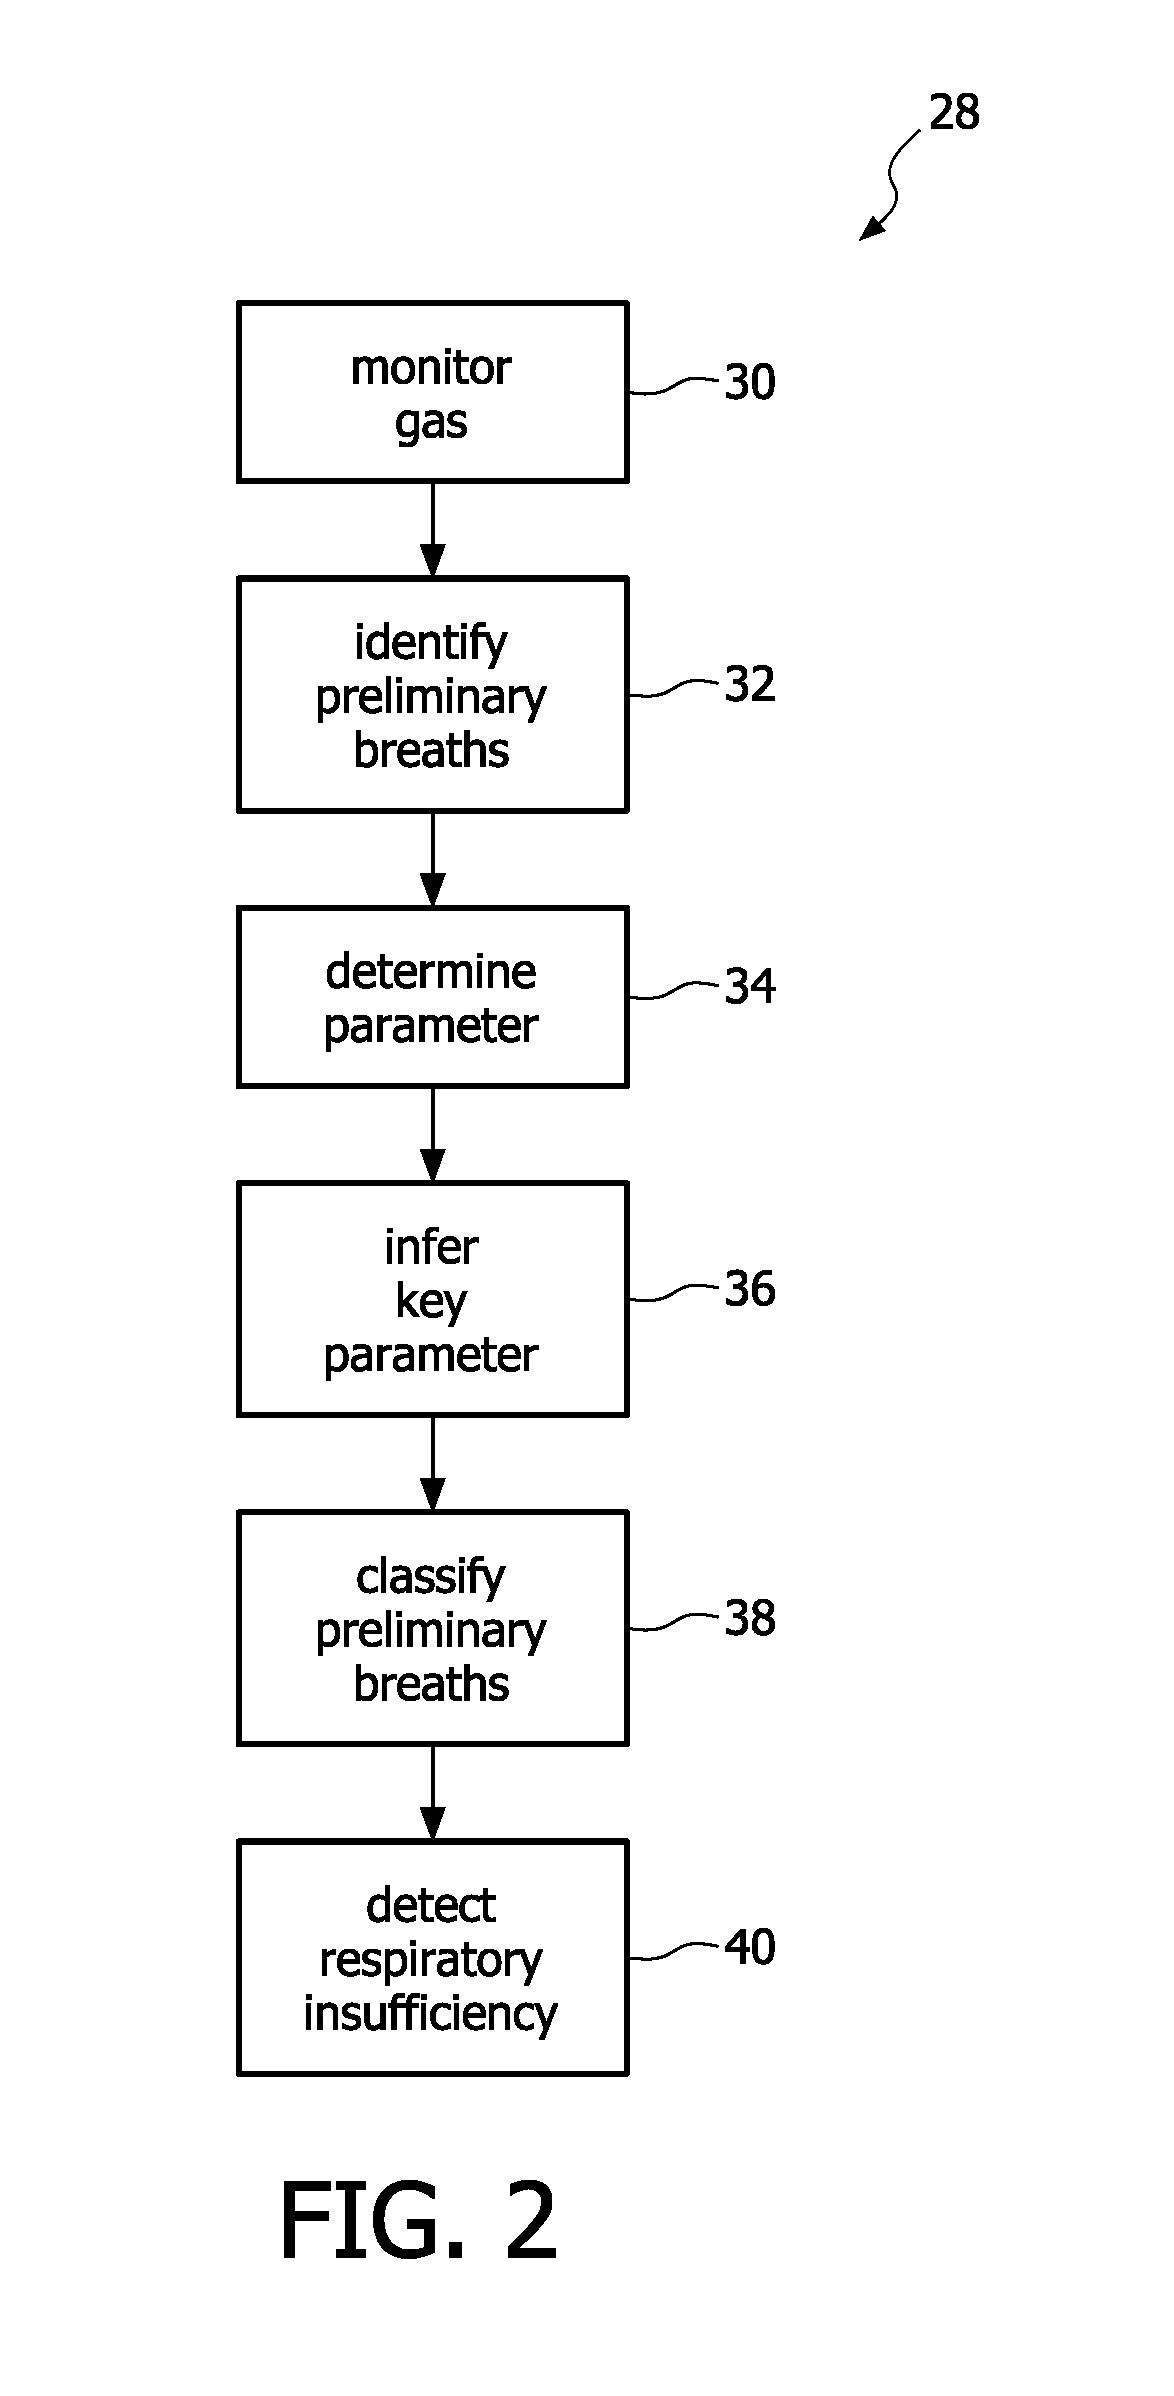 System and method for detecting respiratory insufficiency in the breathing of a subject